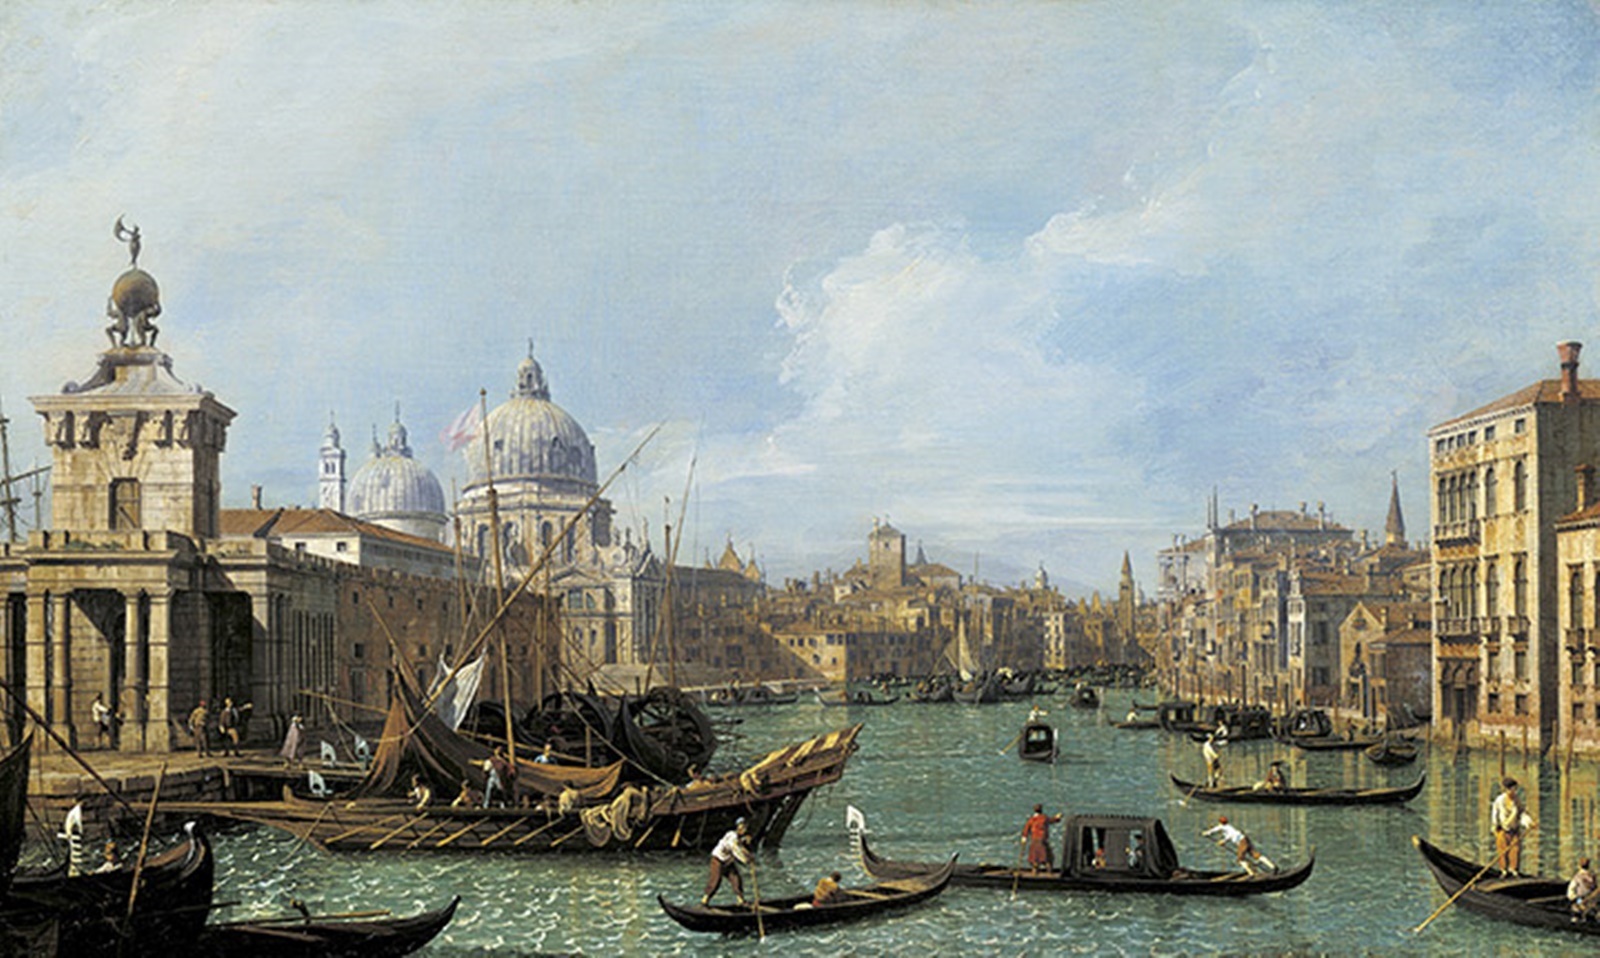 Canaletto, The Mouth of the Grand Canal looking West towards the Carita, c.1729-30, from a set of 12 paintings of the Grand Canal.
<br />Royal Collection Trust/(c) Her Majesty Queen Elizabeth II 2017 
<br />For single use only in connection with the exhibition 'Canaletto & the Art of Venice' at The Queen's Gallery, Buckingham Palace, 19 May - 12 November 2017. Not to be archived or sold on.